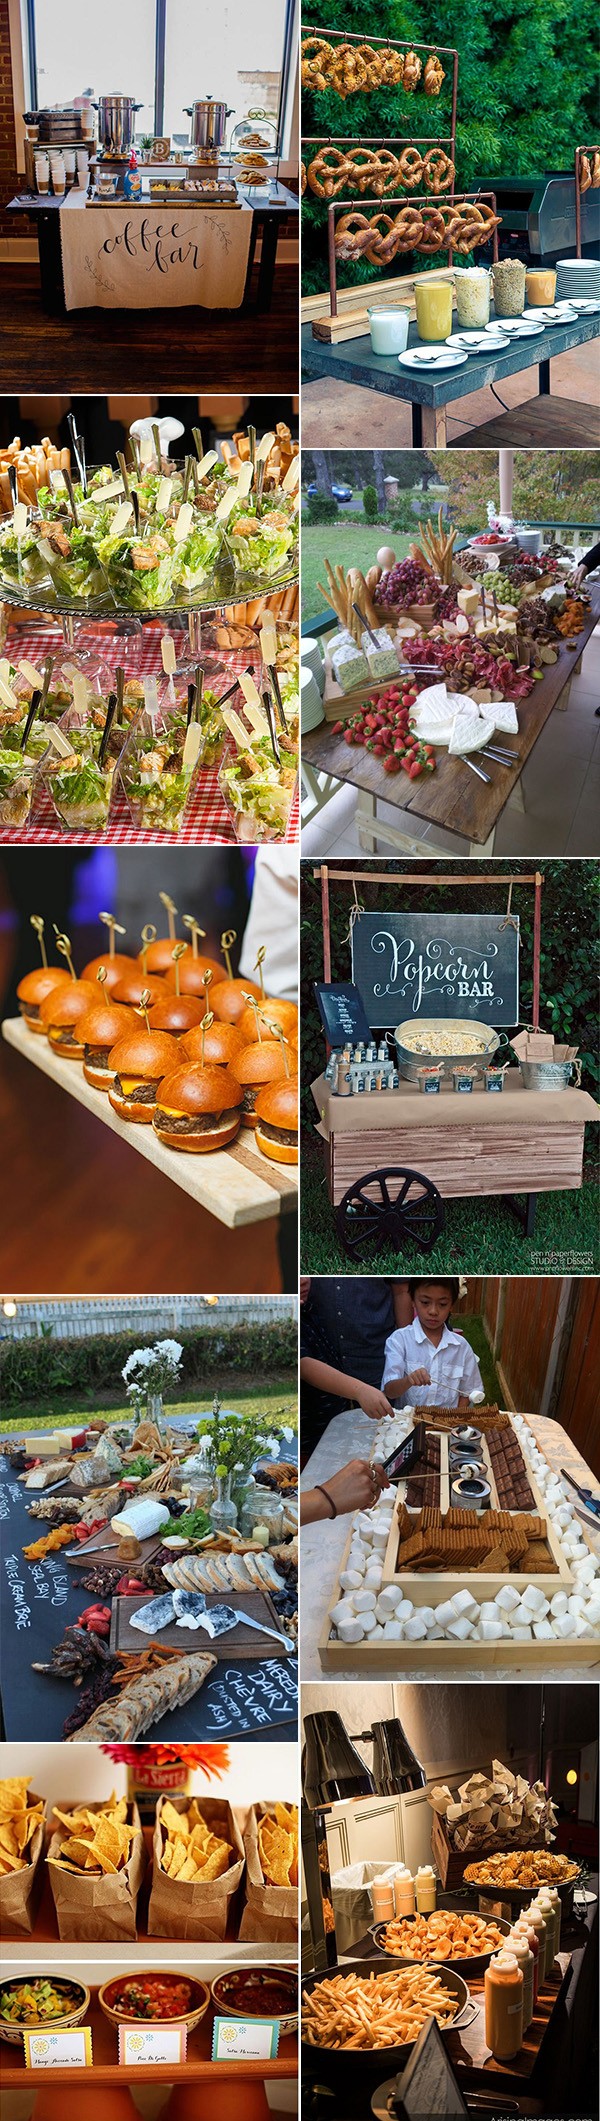 20 Great Wedding Food Station Ideas for Your Reception